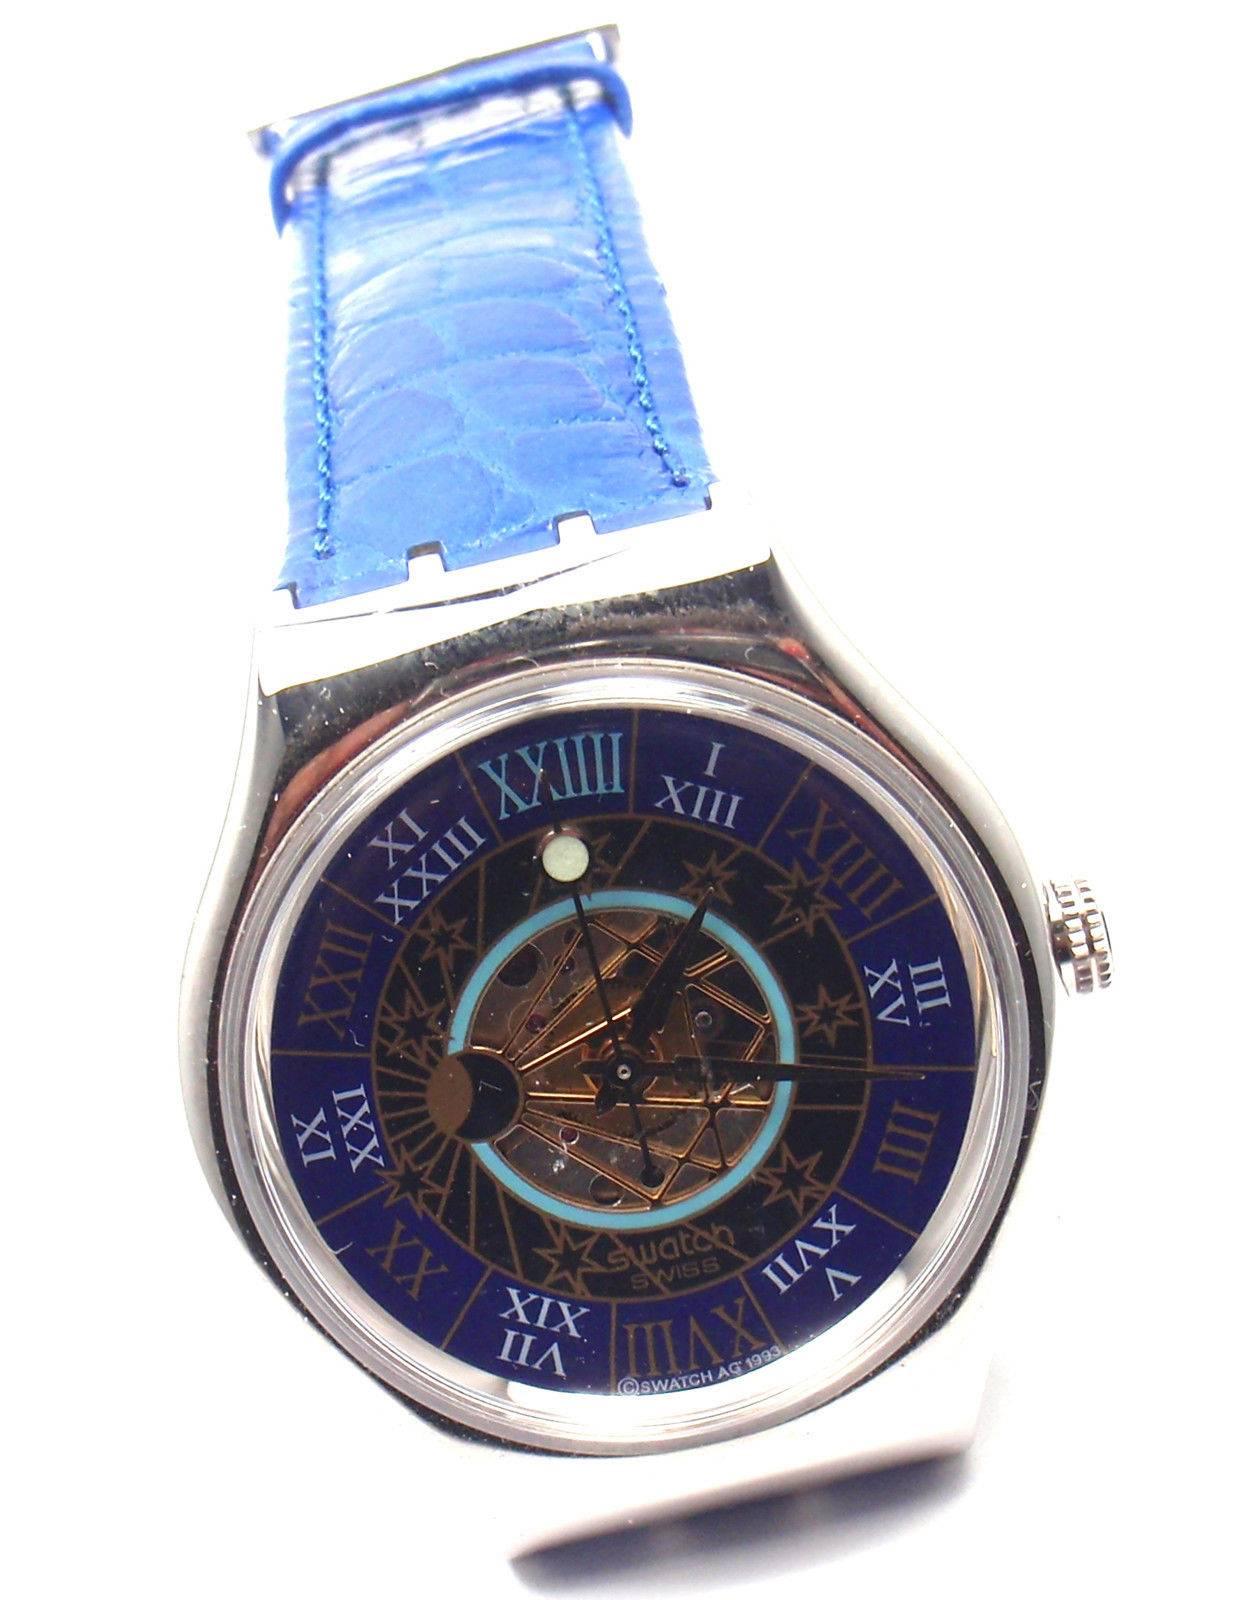 Limited Edition Tressor Magique Automatic Platinum Watch by Swatch.

This watch comes with box and papers.

This limited edition Tresor Magique Swatch watch is in truly outstanding condition. Completely unworn and in its original large stainless